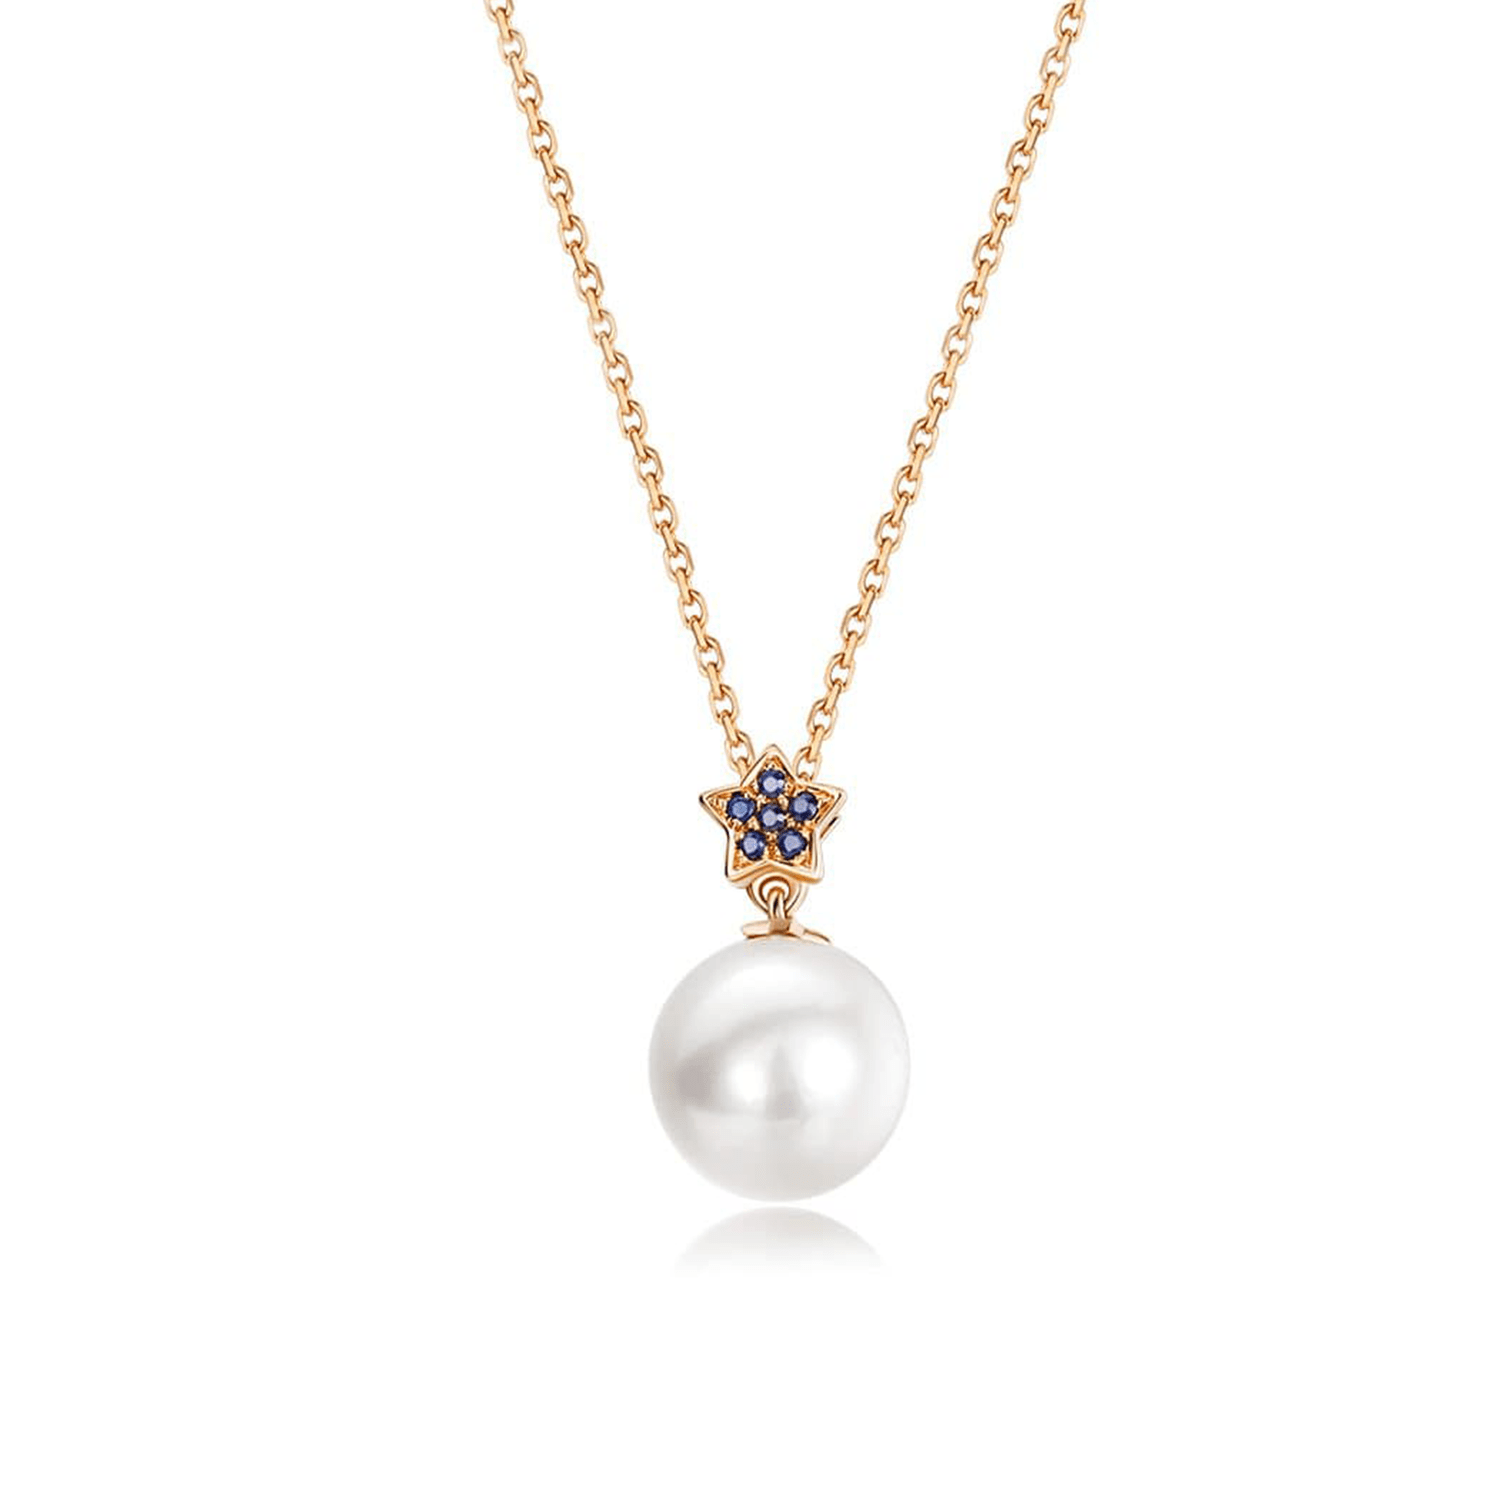 8mm akoya pearl pendant with natural blue sapphire star necklace in 18k gold